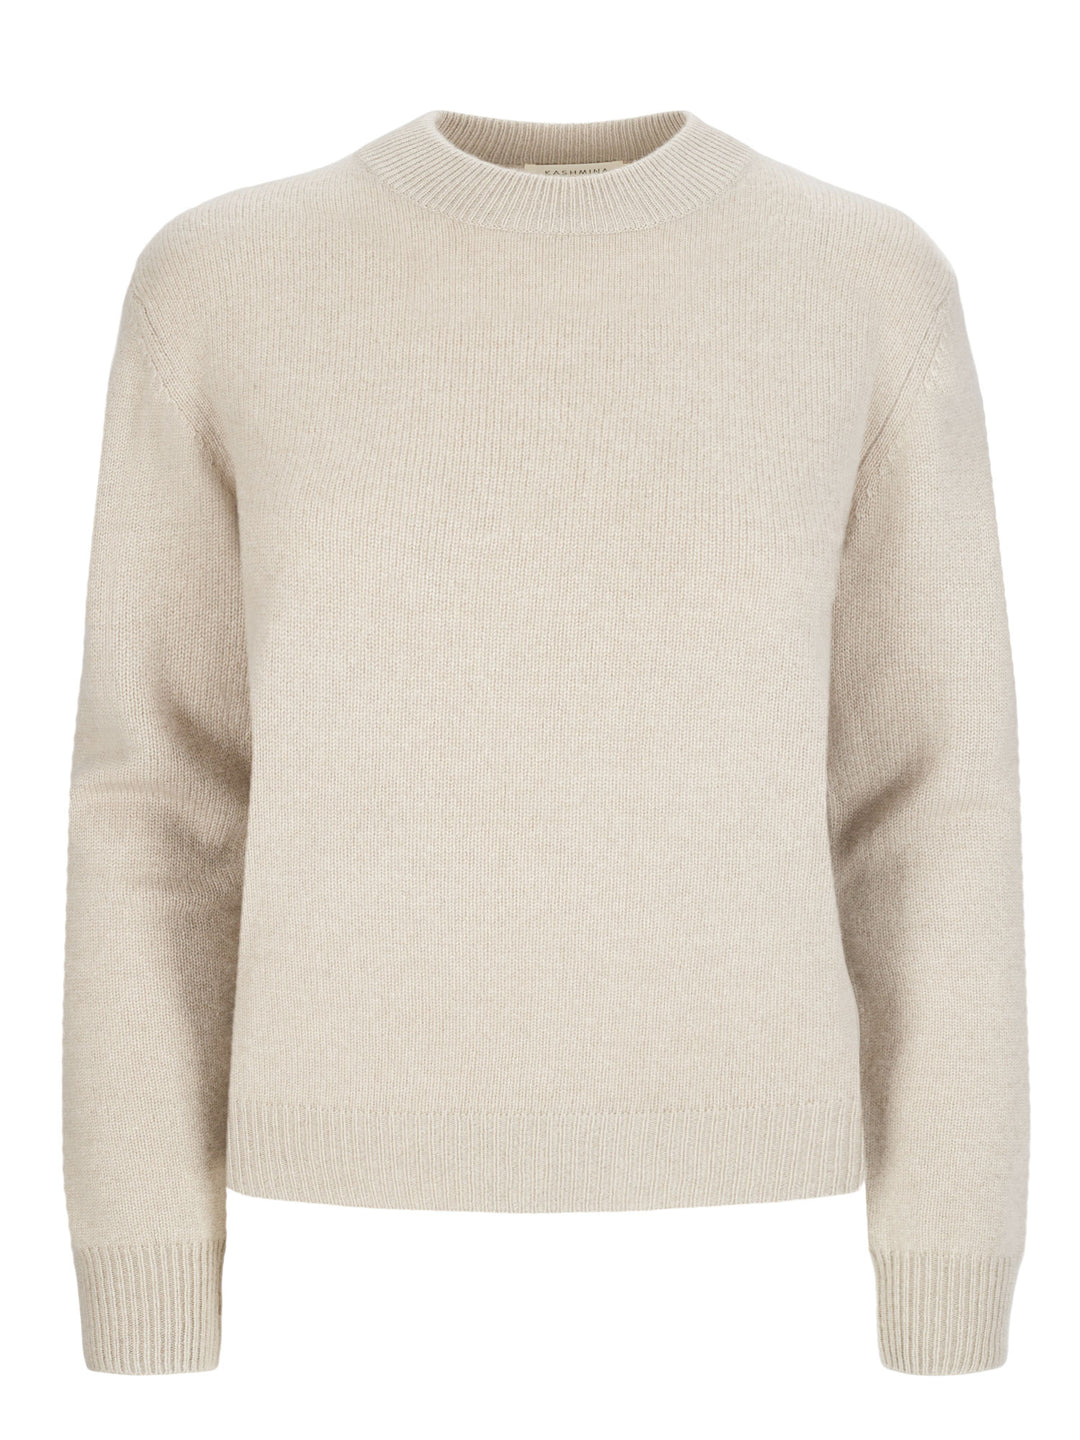 Cashmere sweater "Sofia long" color ginger. Norwegian design in 100% cashmere from Kashmina